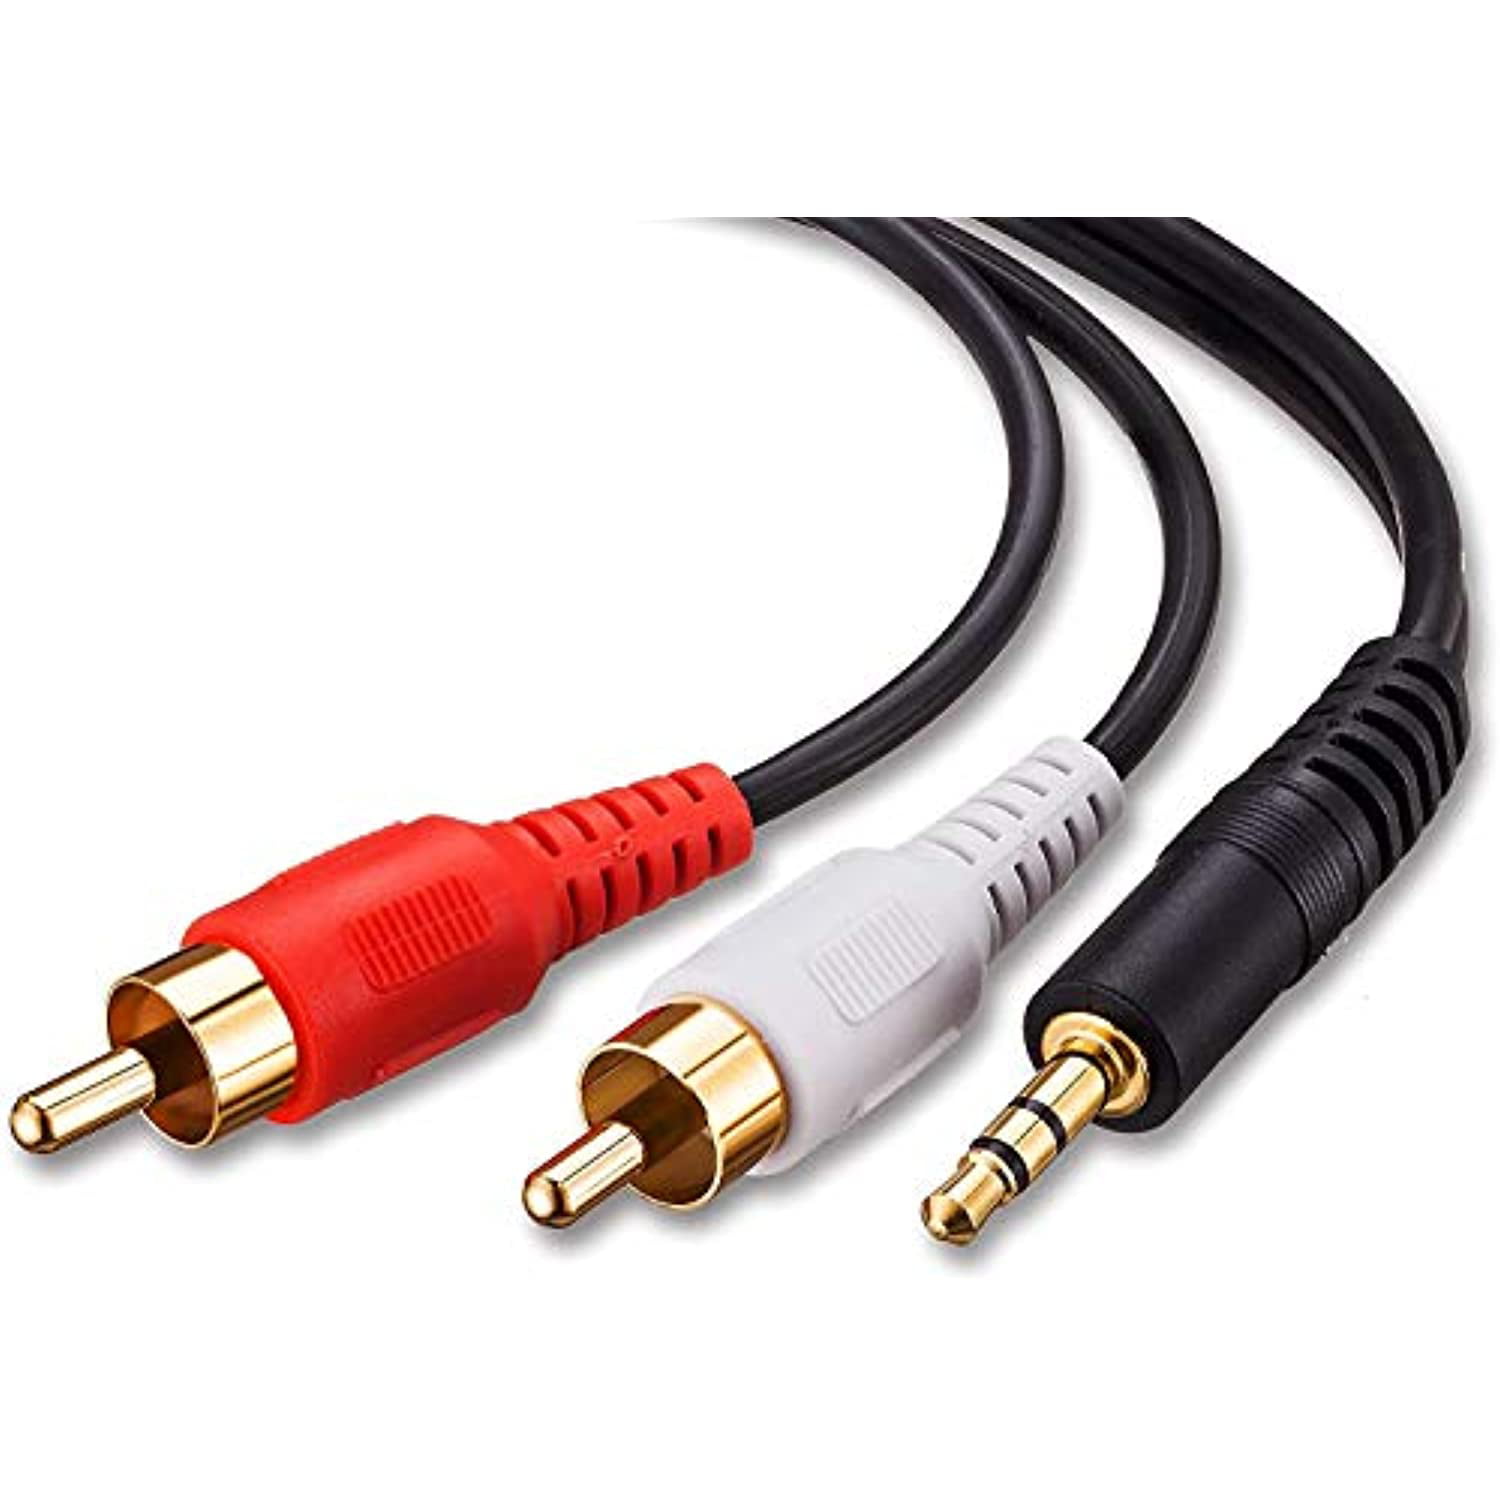 Tanbin 40ft 3.5mm Male to 2 RCA Stereo Audio Cable Phones Auxiliary Stereo Y Splitter Adapter Male to Male RCA Plugger Connectors for iPhone RCA Cable 40ft Mp3 and More Tablets iPad